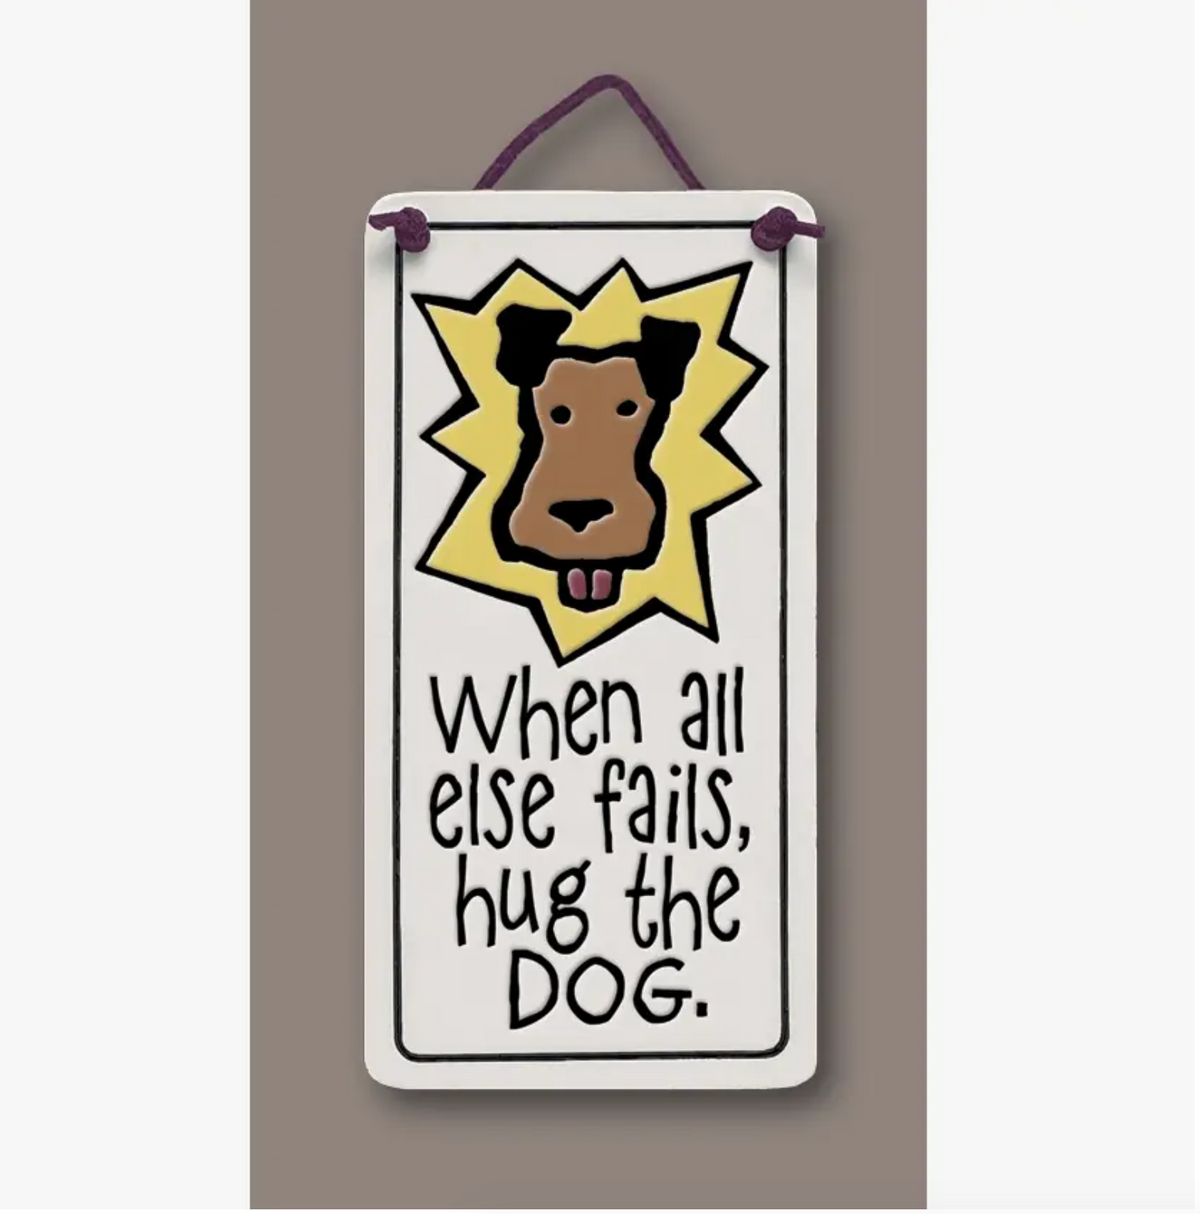 Hug the Dog Plaque - Heart of the Home LV